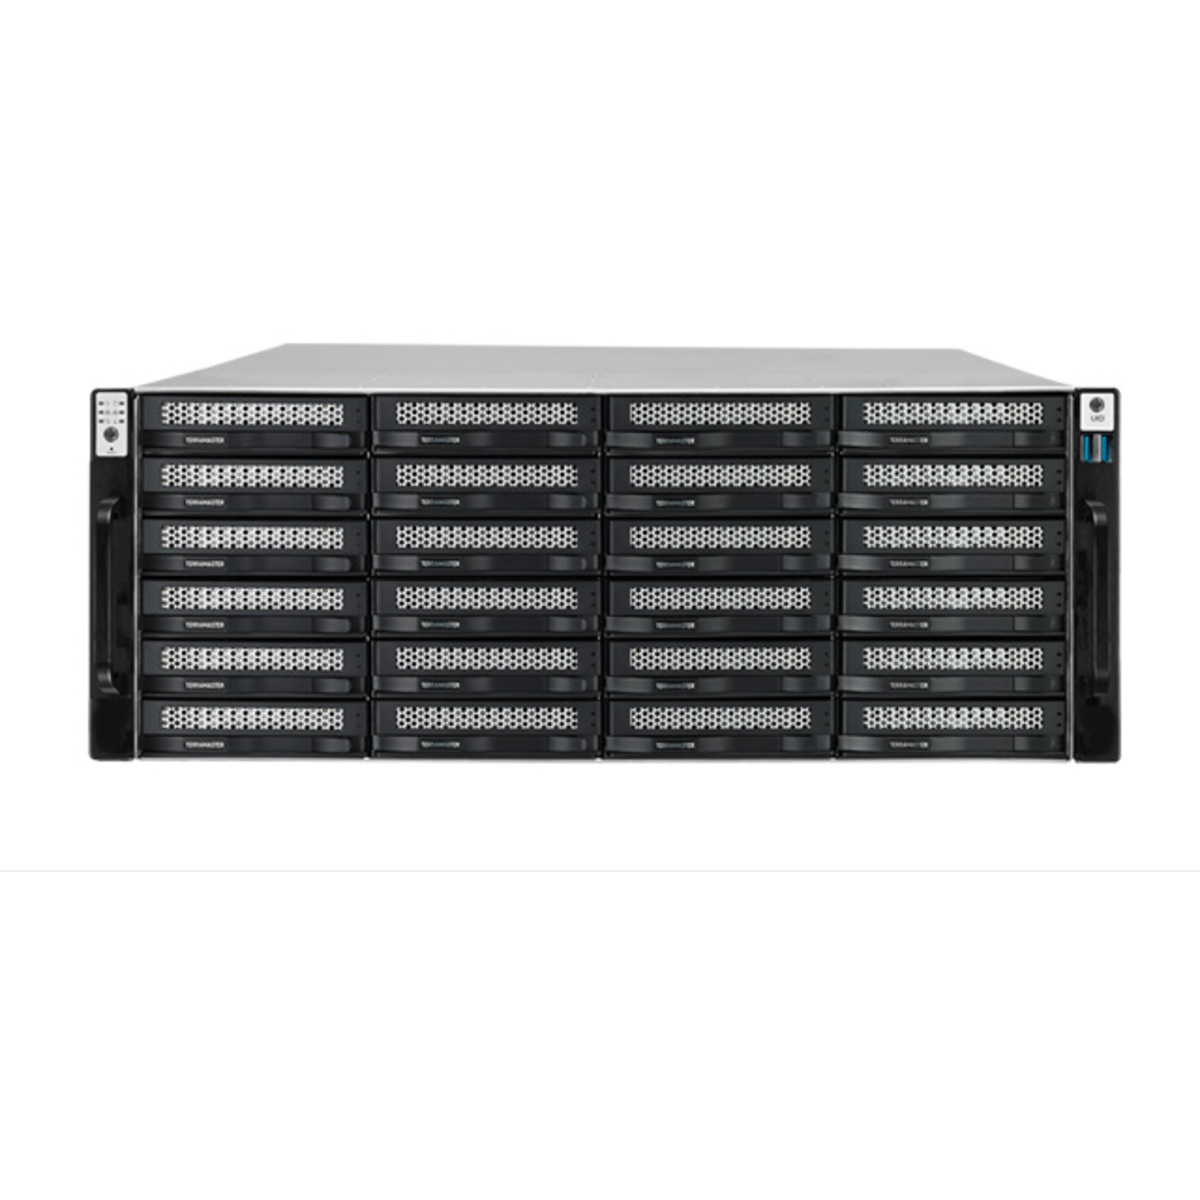 TerraMaster U24-722-2224 36tb 24-Bay RackMount Large Business / Enterprise NAS - Network Attached Storage Device 18x2tb Western Digital Red Plus WD20EFZX 3.5 5400rpm SATA 6Gb/s HDD NAS Class Drives Installed - Burn-In Tested U24-722-2224